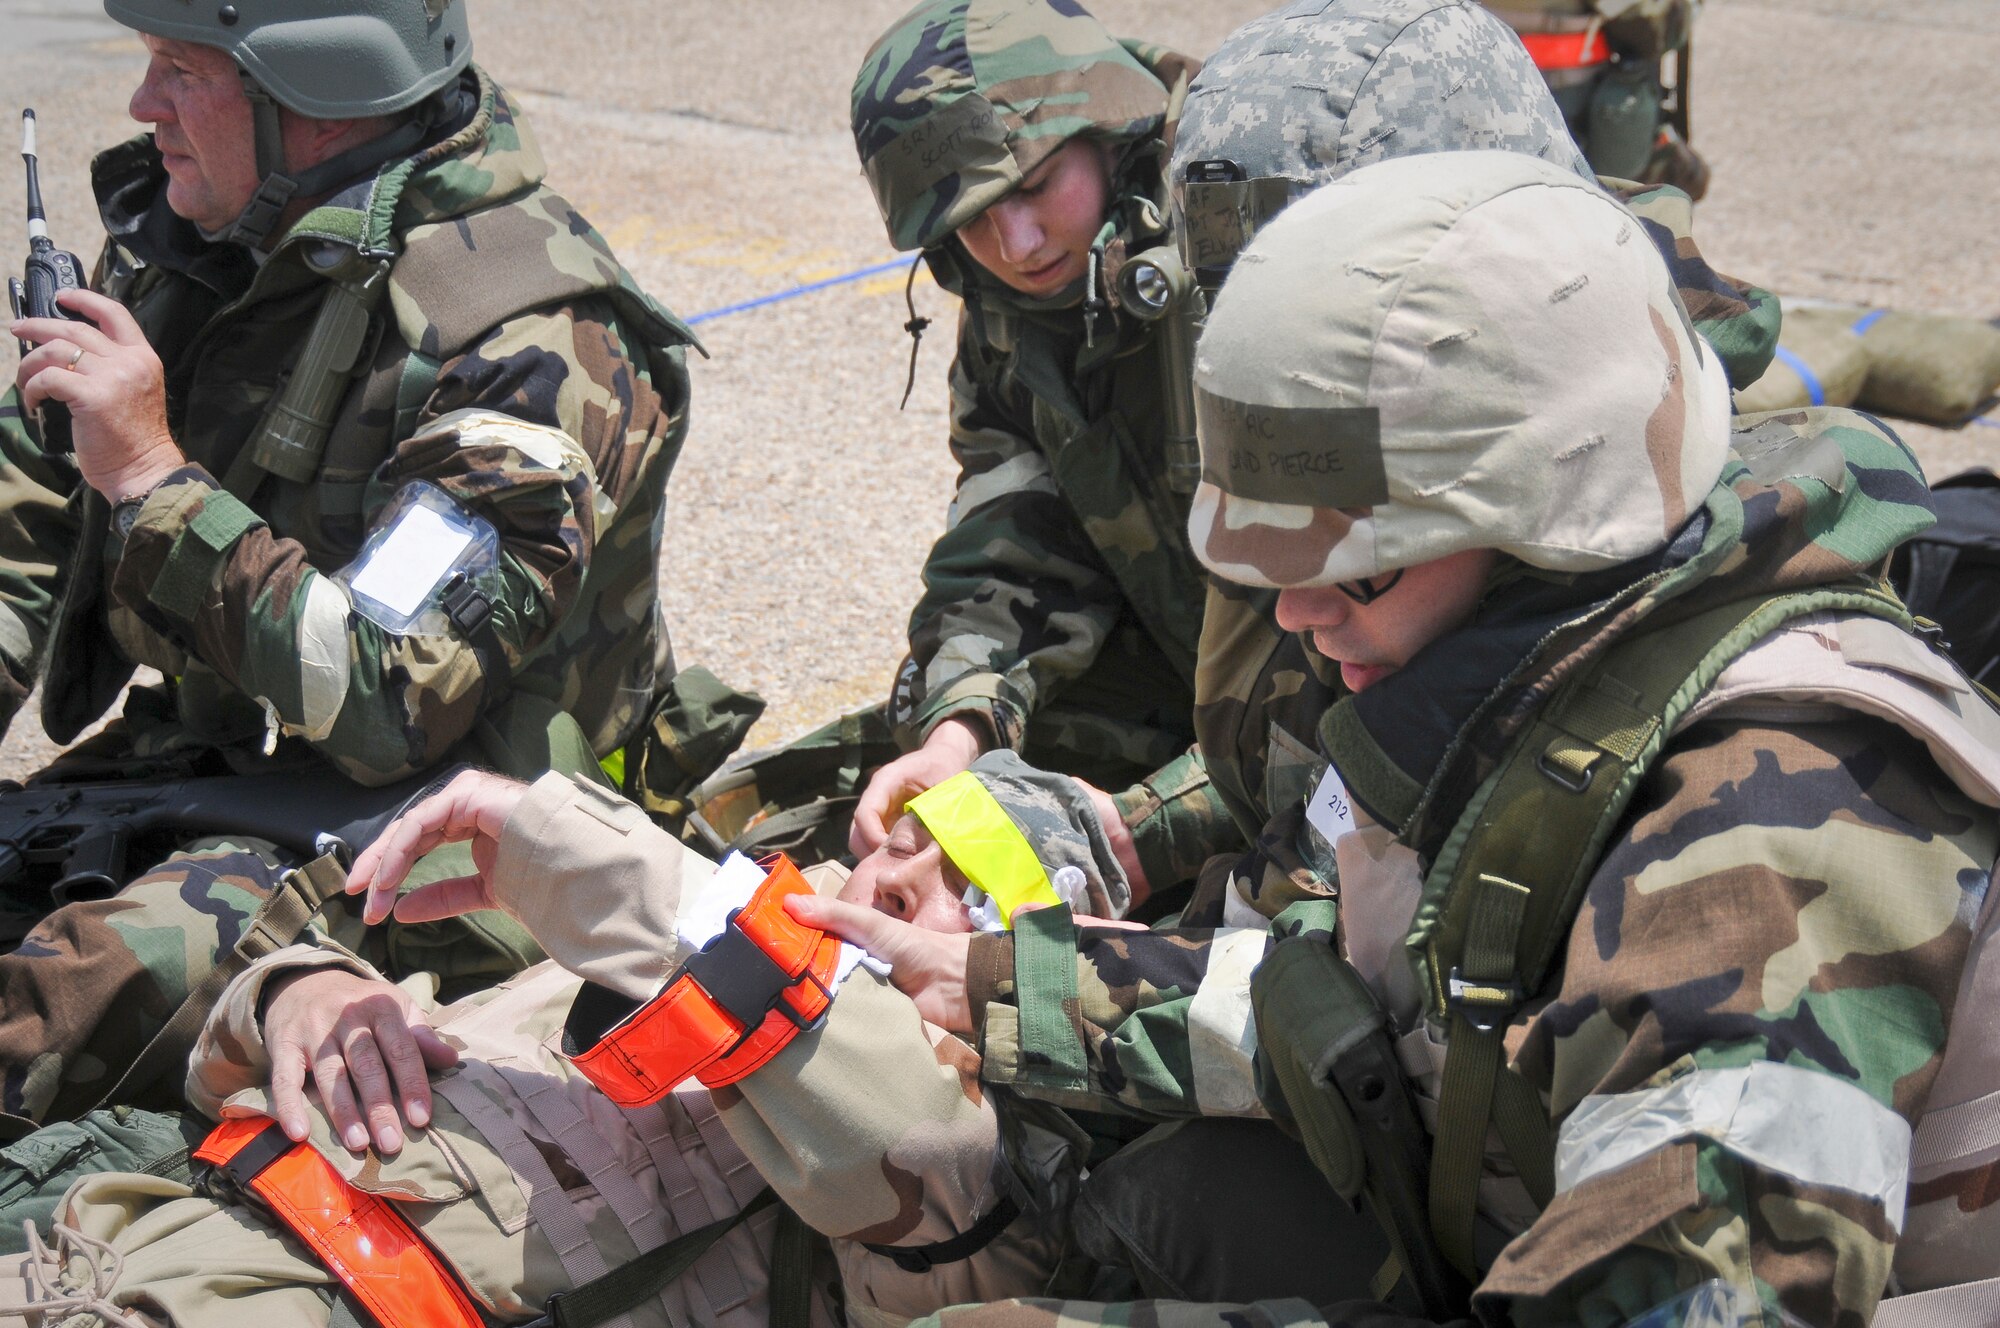 Members of the 123rd Airlift Wing render first-aid to a fallen Airman from the 317th Airlift Group after a simulated attack on their shared facilities May 20, 2010 at the Gulfport Combat Readiness Training Center in Gulfport, Miss. The two units, along with the 70th Aerial Port Squadron, were being evaluated for wartime readiness as part of an Air Mobility Command Operational Readiness Inspection. (U.S. Air Force photo/Tech. Sgt. Dennis Flora) (Released)